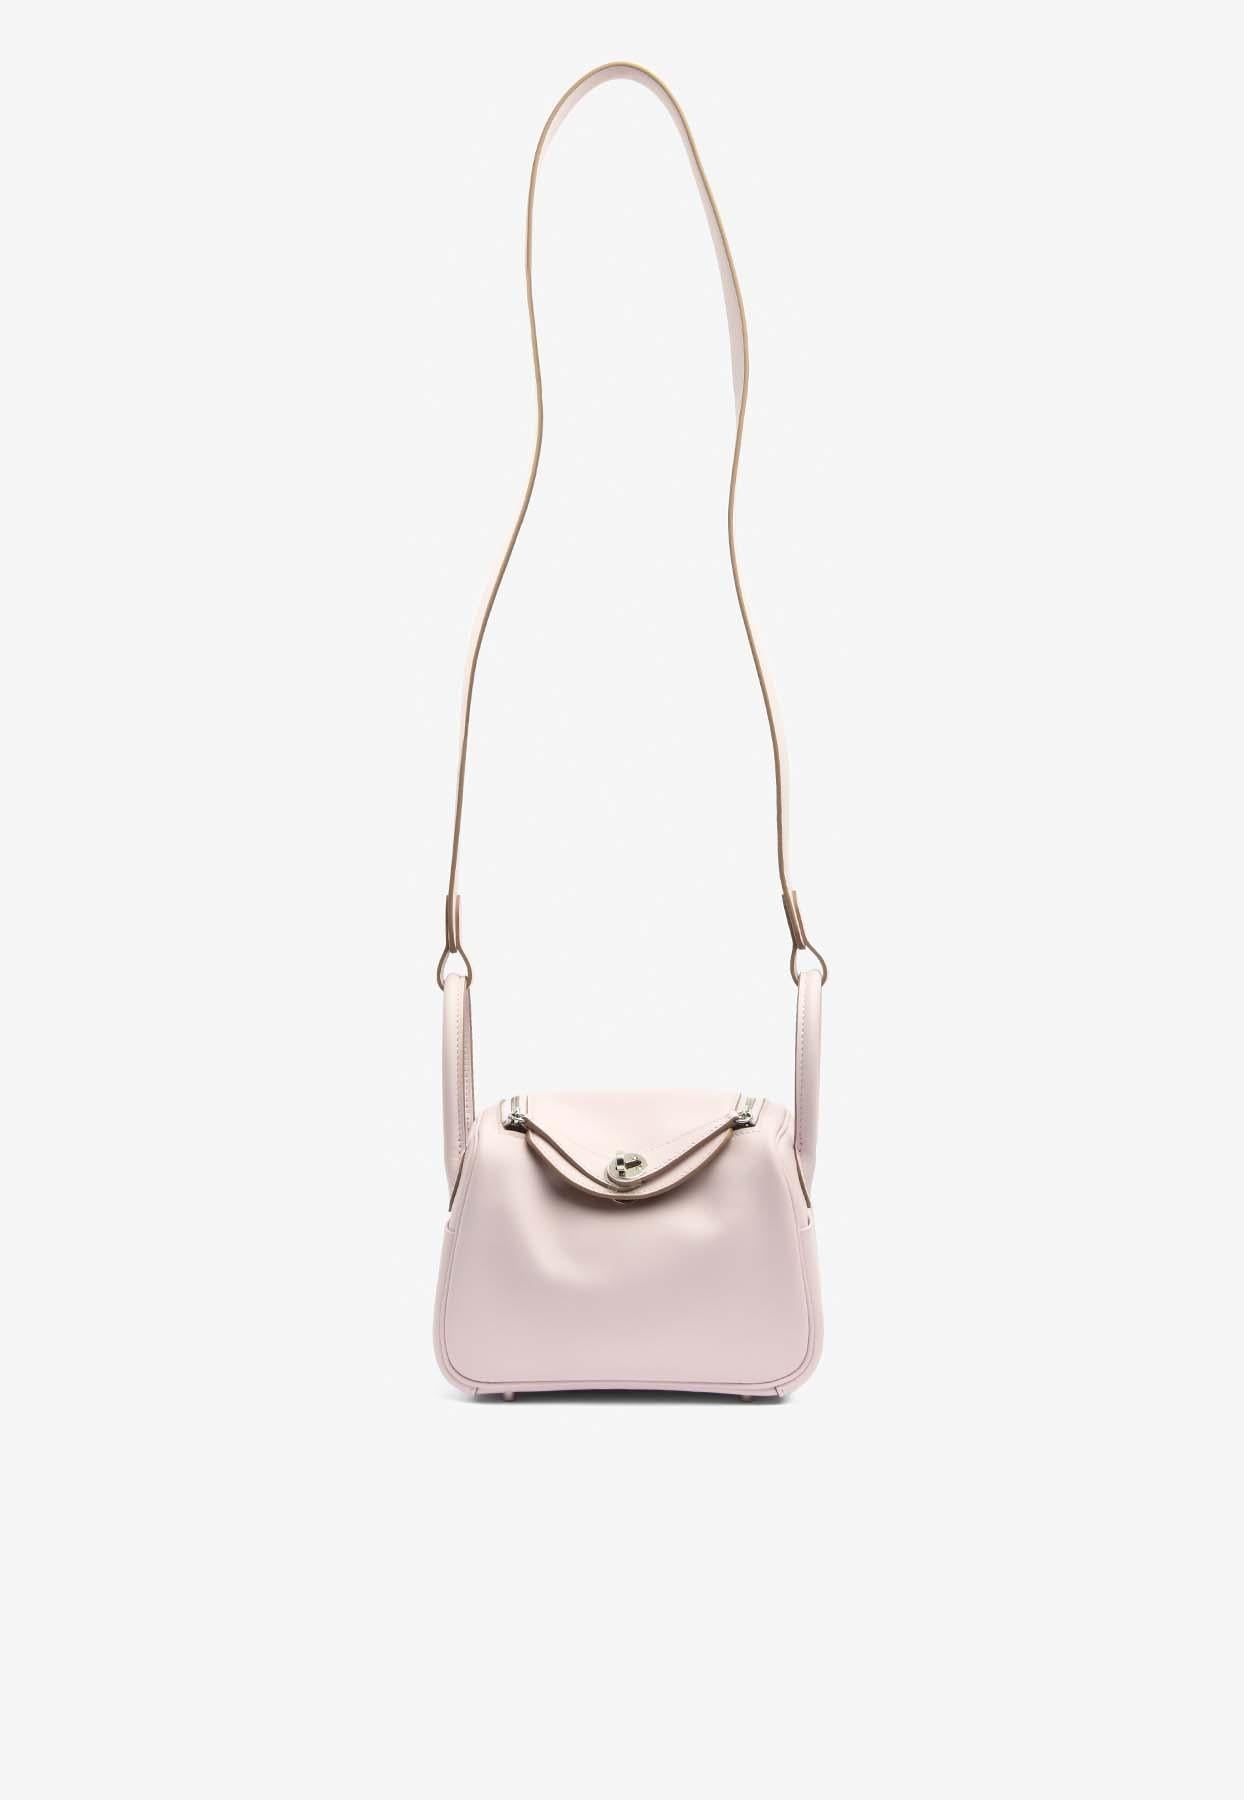 Women's Mini Lindy 20 Verso in Mauve Pale and Gold Swift Leather in Palladium Hardware For Sale